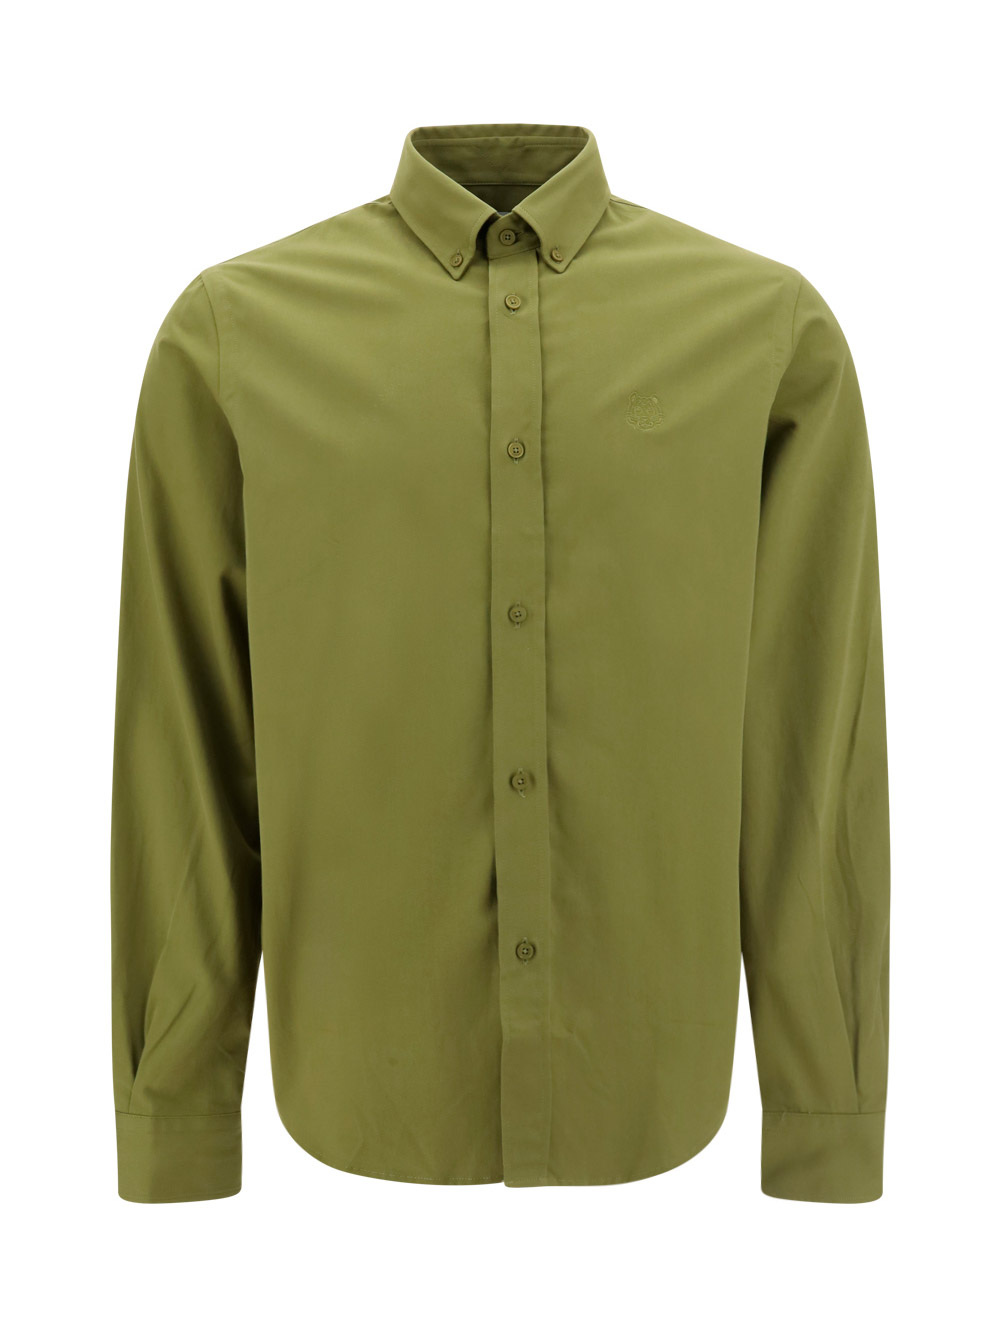 Kenzo Tiger Button Shirt In Olive